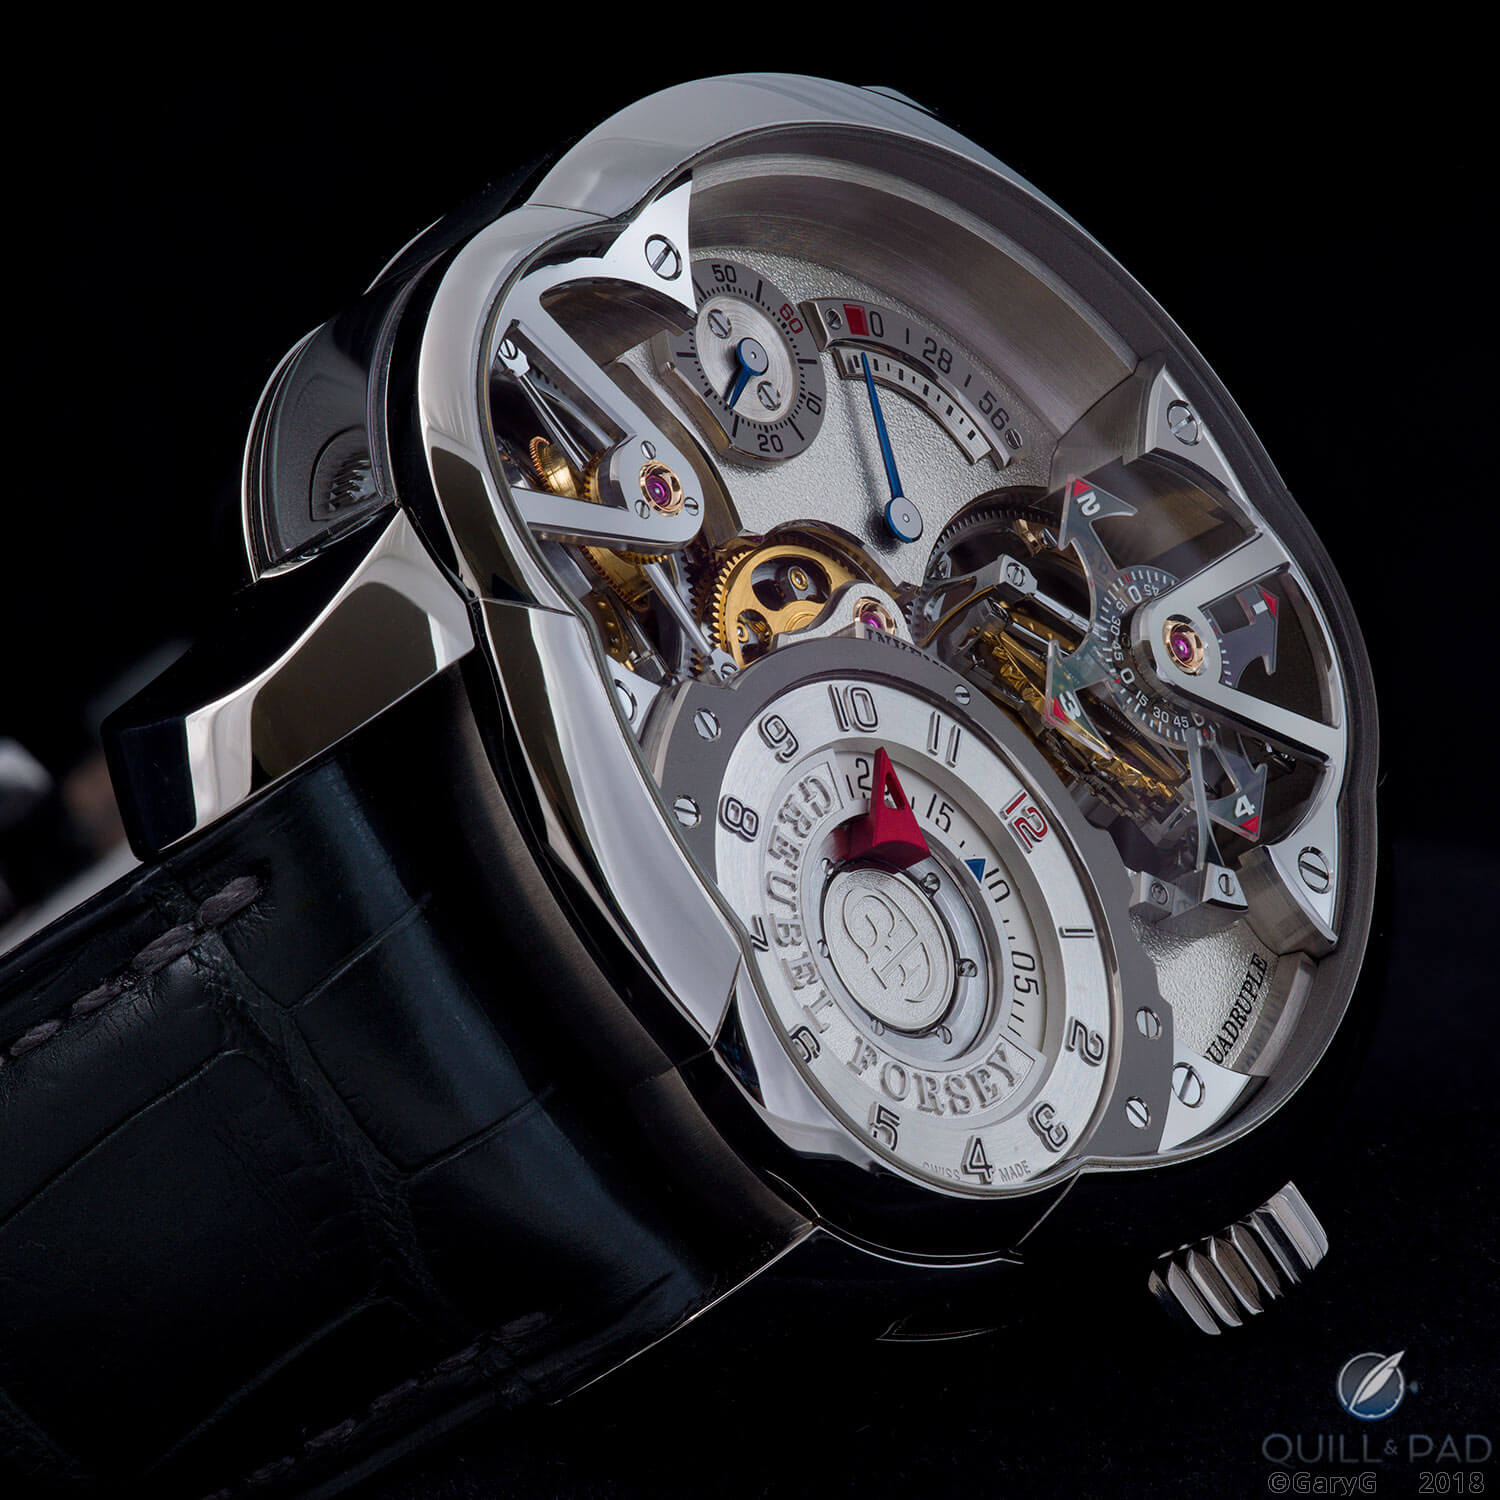 Parting shot: object of desire – Invention Piece 2 by Greubel Forsey